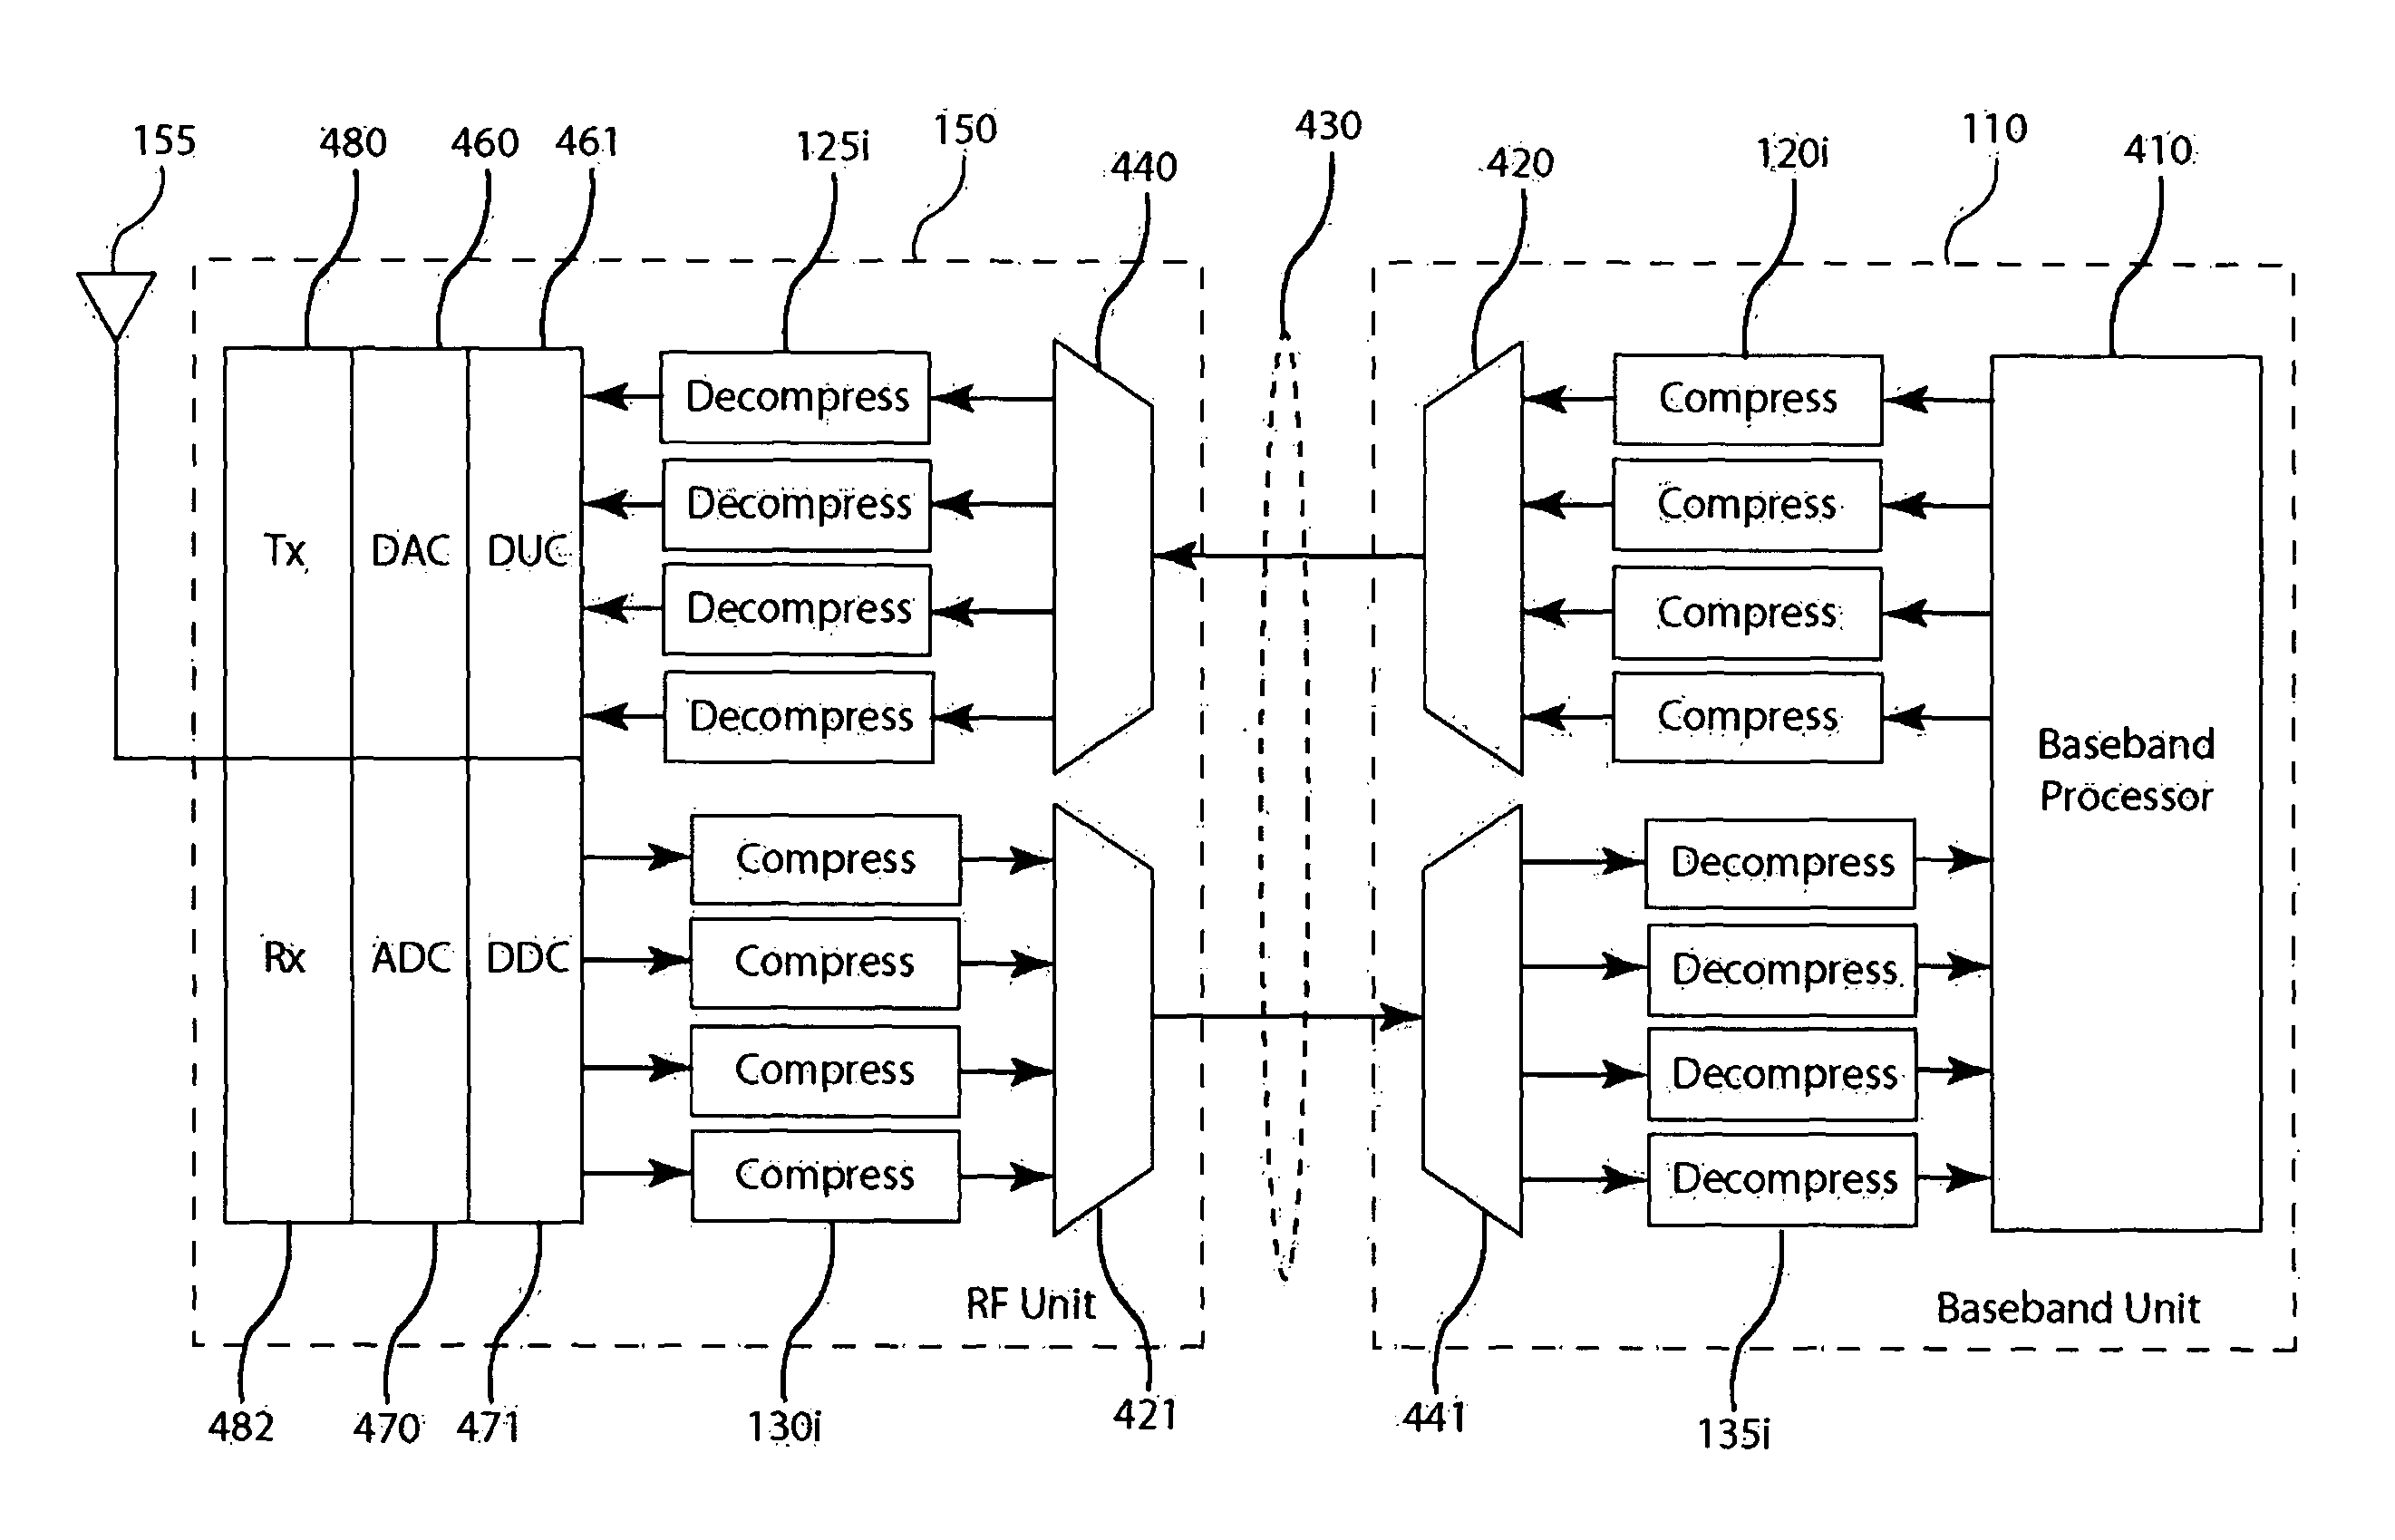 Compression of signals in base transceiver systems